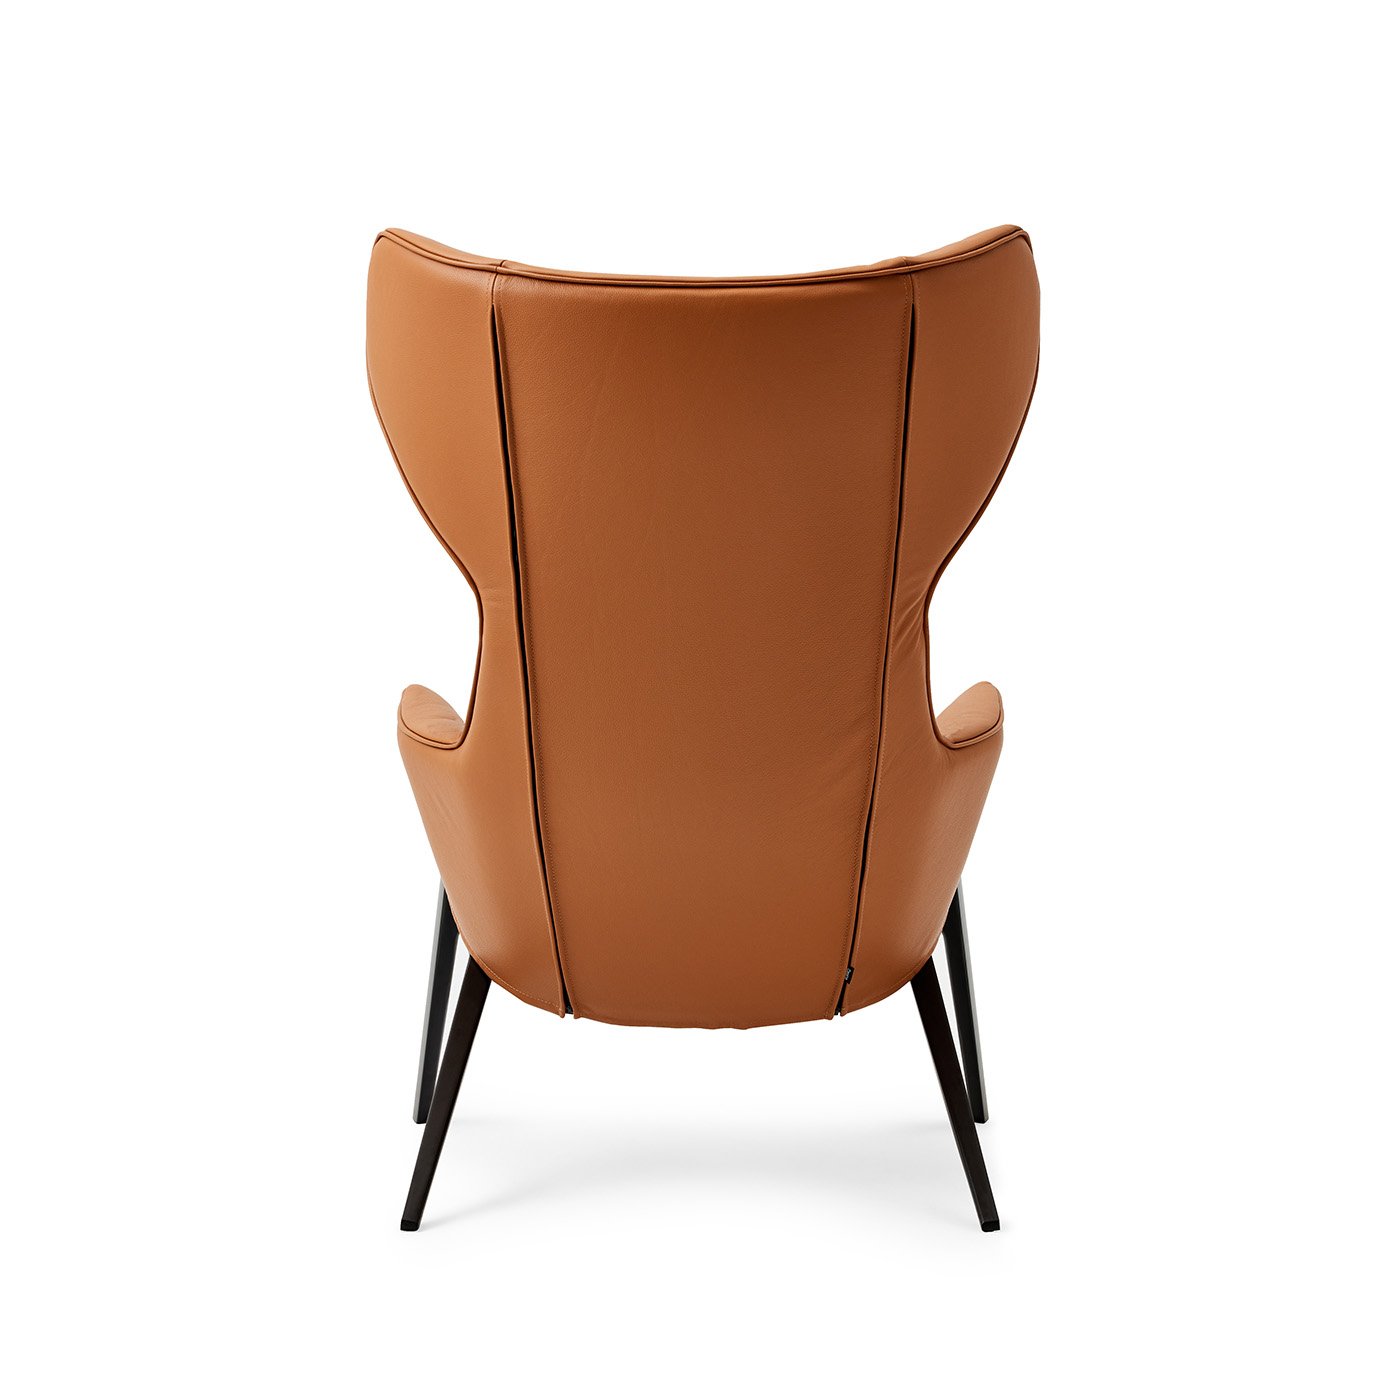 Detail back shot of the P22 Lounge chair in Ambra